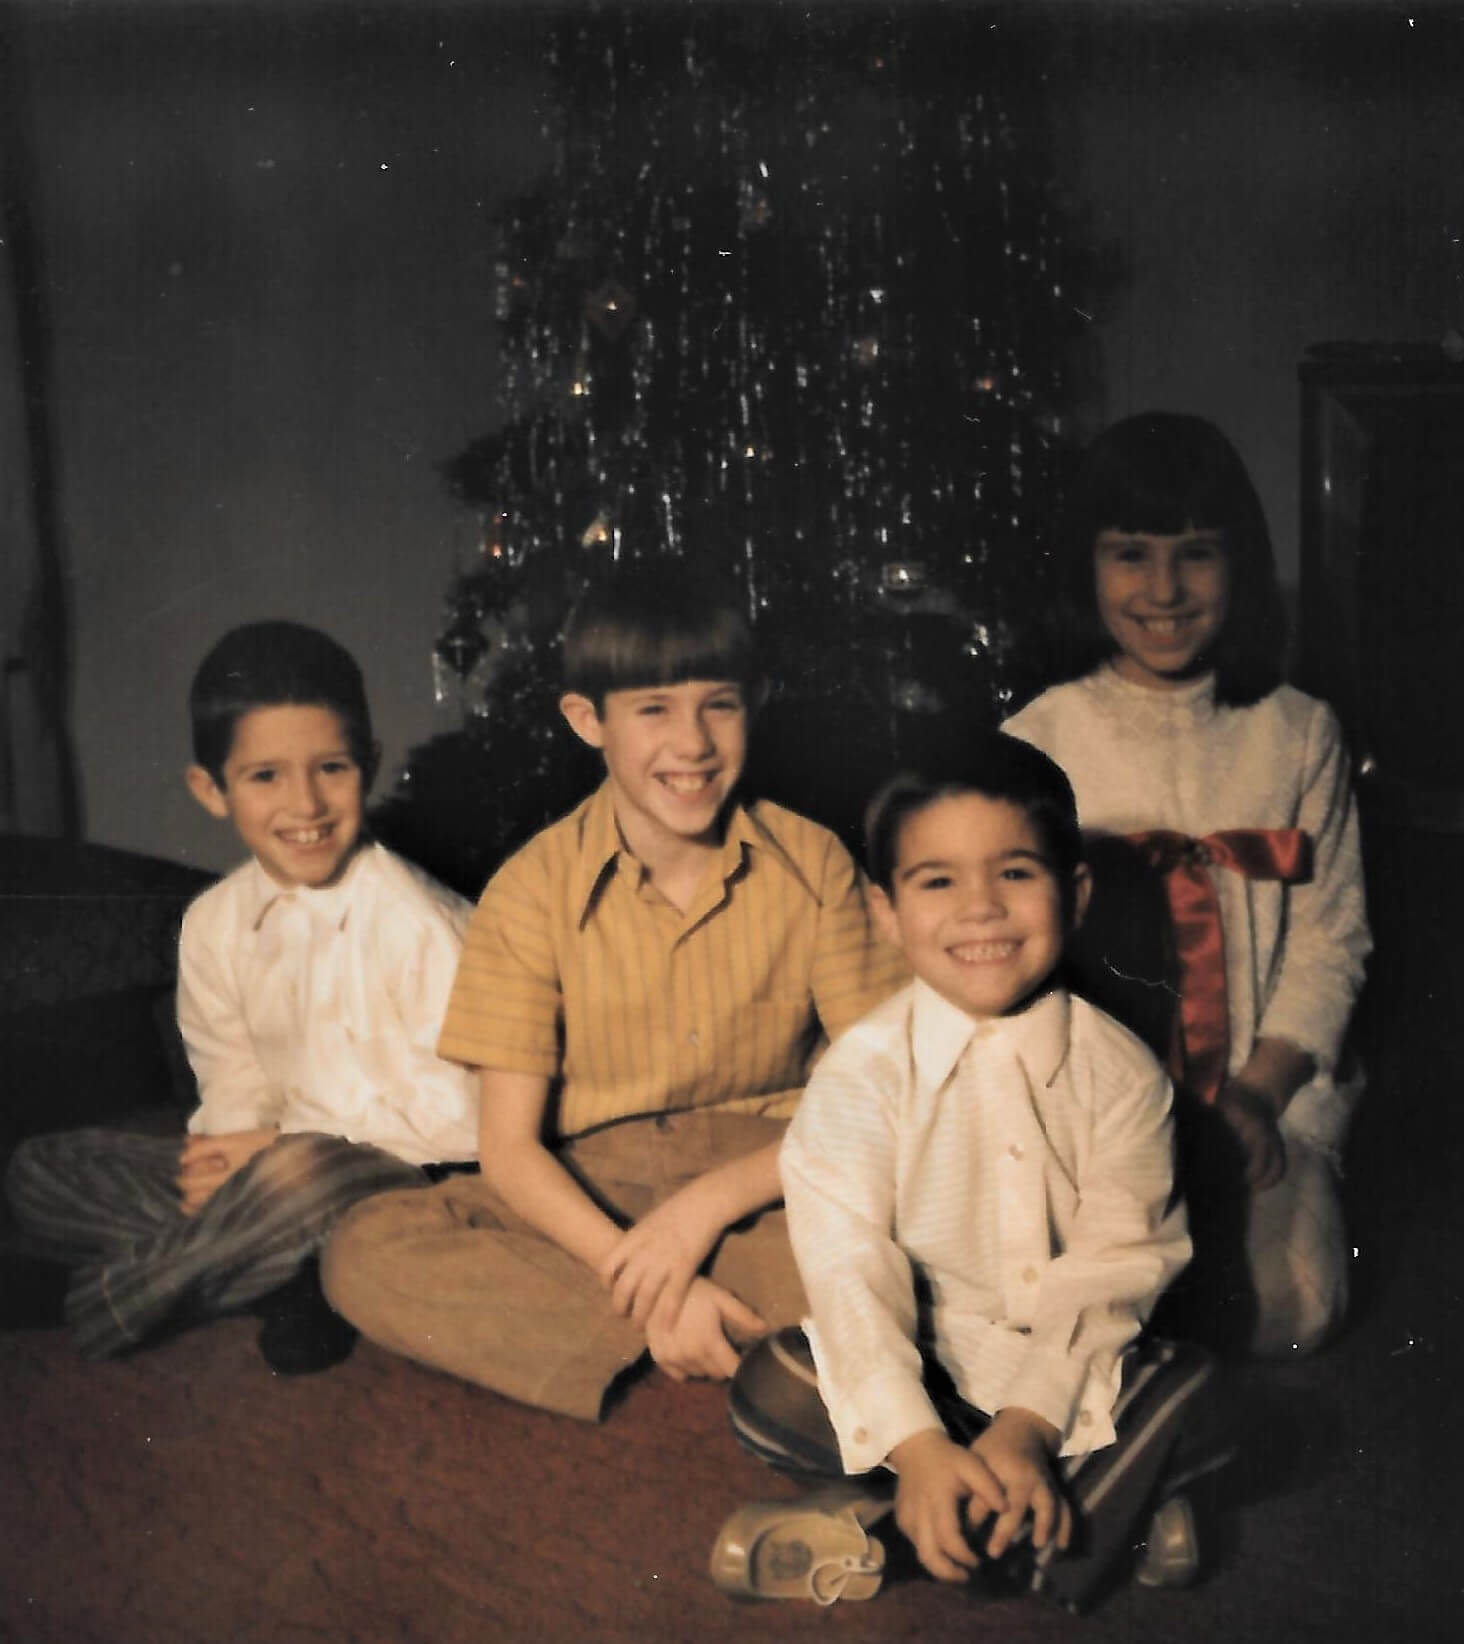 Mike and his siblings in front of a Christmas tree